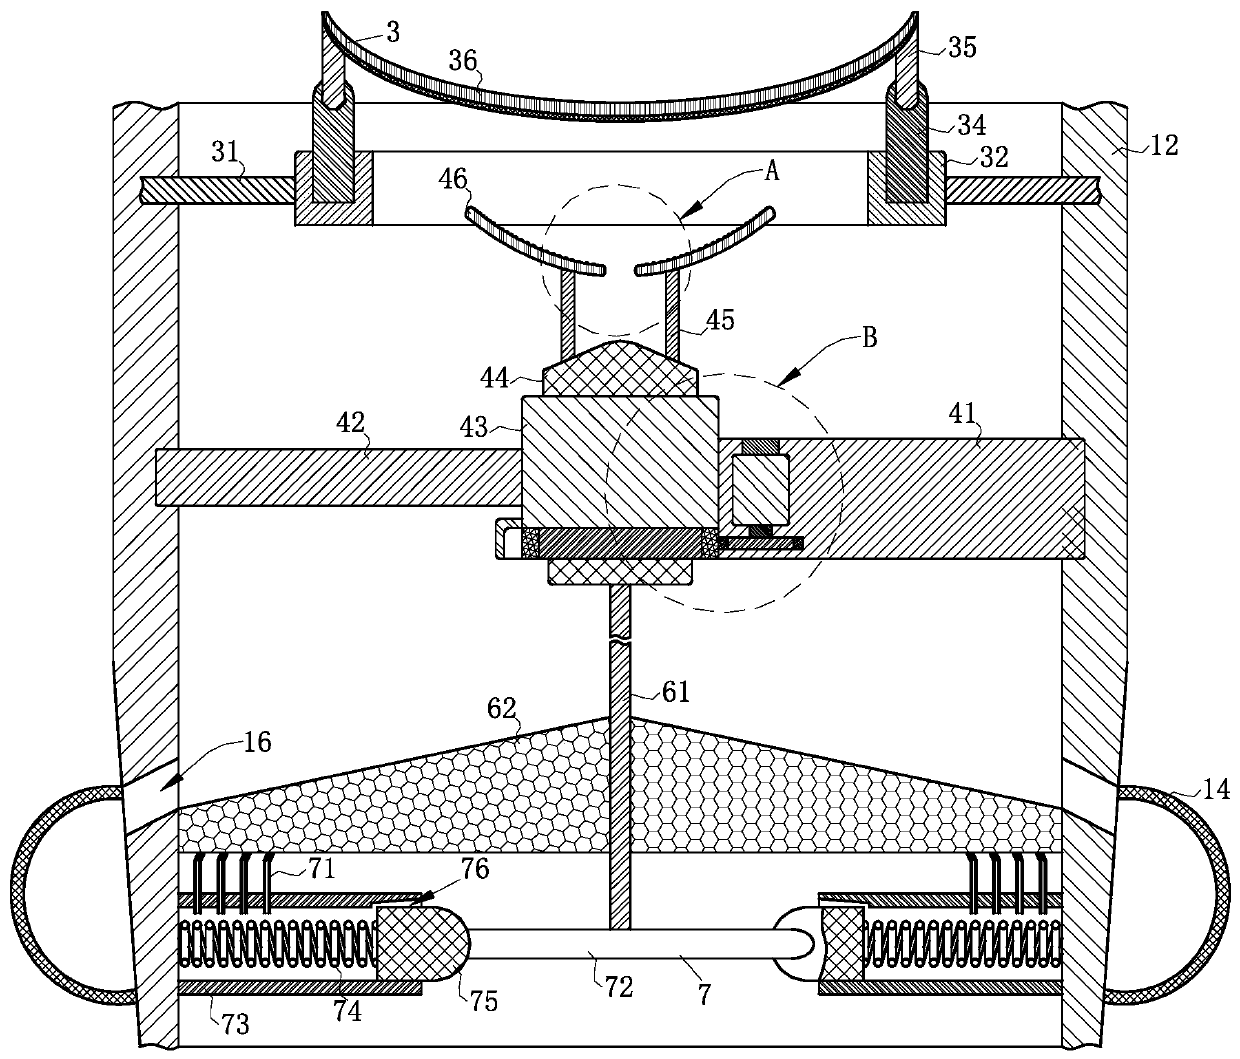 Mechanical device applied to sewage treatment